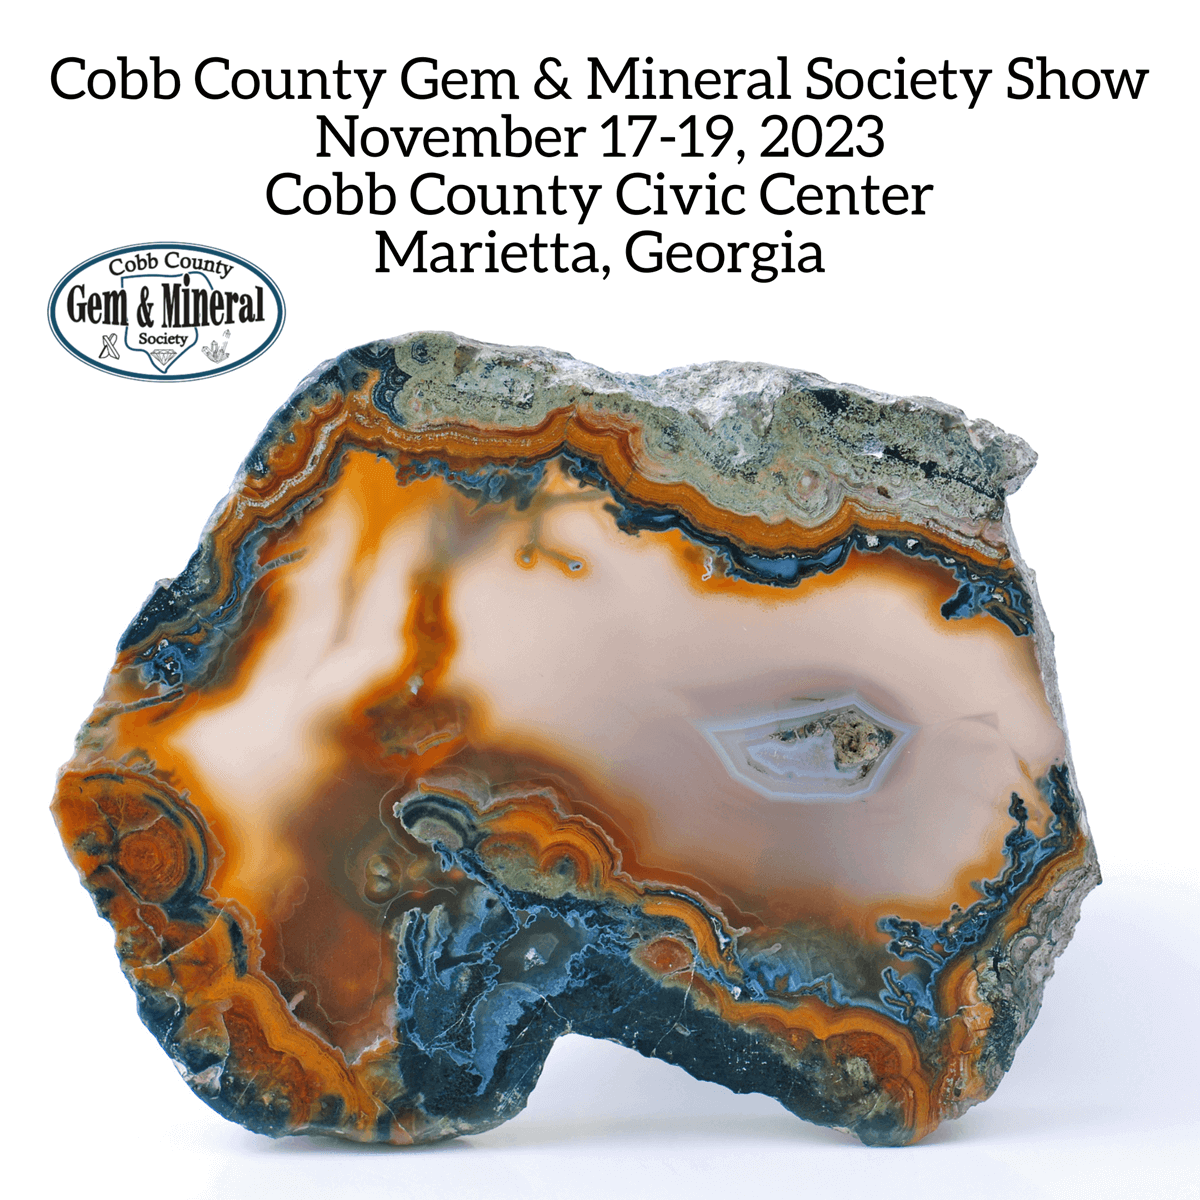 Cobb County Gem & Mineral Society Show 2023